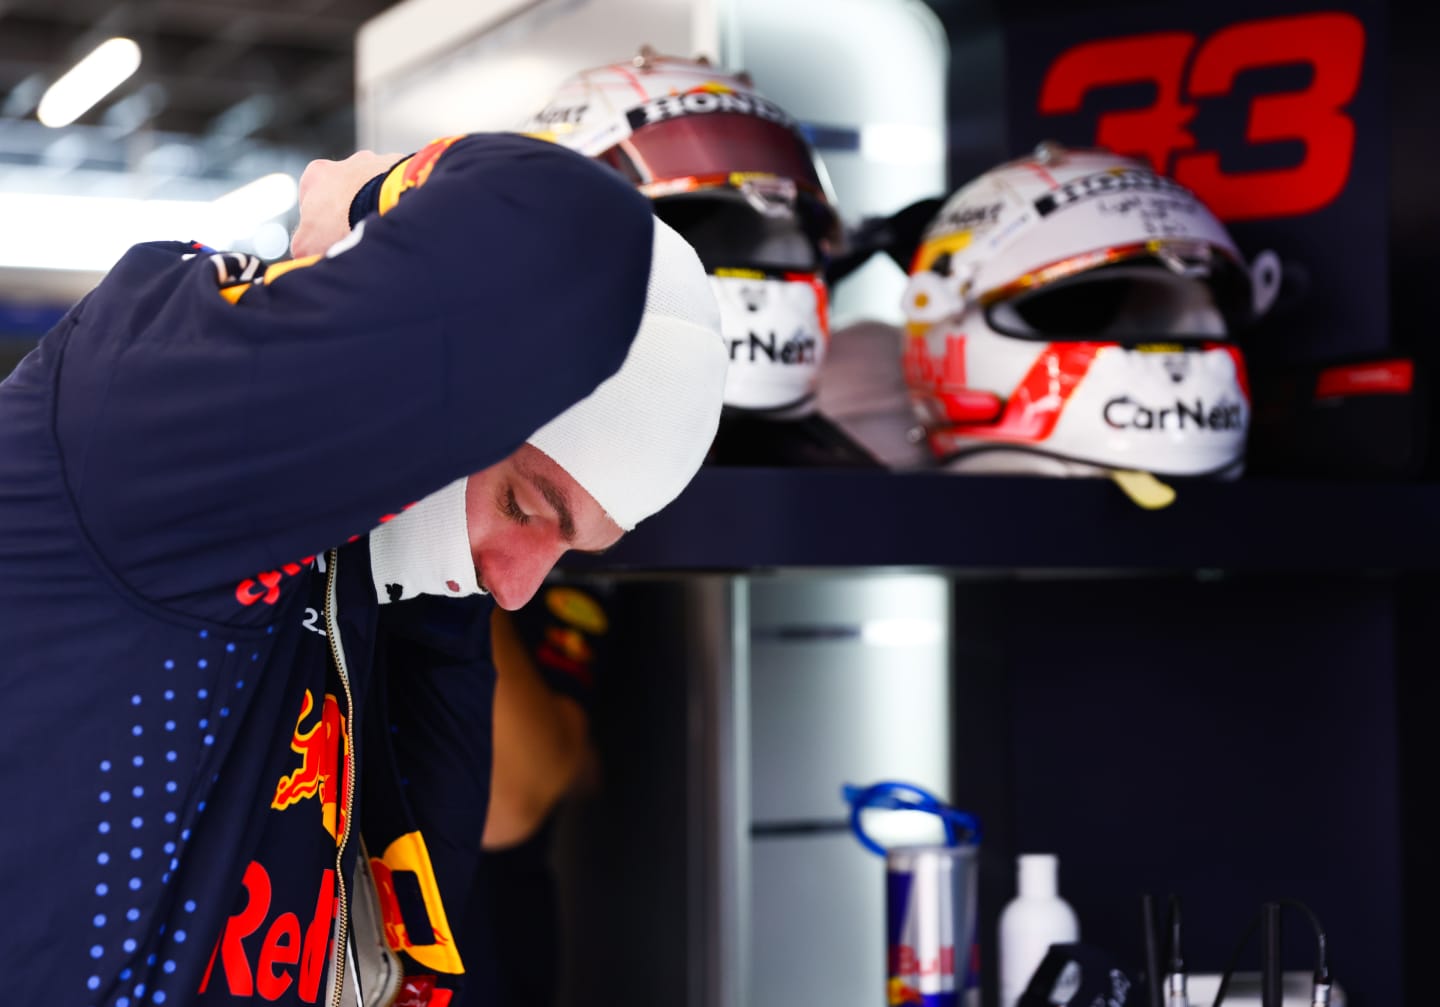 JEDDAH, SAUDI ARABIA - DECEMBER 03: Max Verstappen of Netherlands and Red Bull Racing prepares to drive in the garage during practice ahead of the F1 Grand Prix of Saudi Arabia at Jeddah Corniche Circuit on December 03, 2021 in Jeddah, Saudi Arabia. (Photo by Mark Thompson/Getty Images)